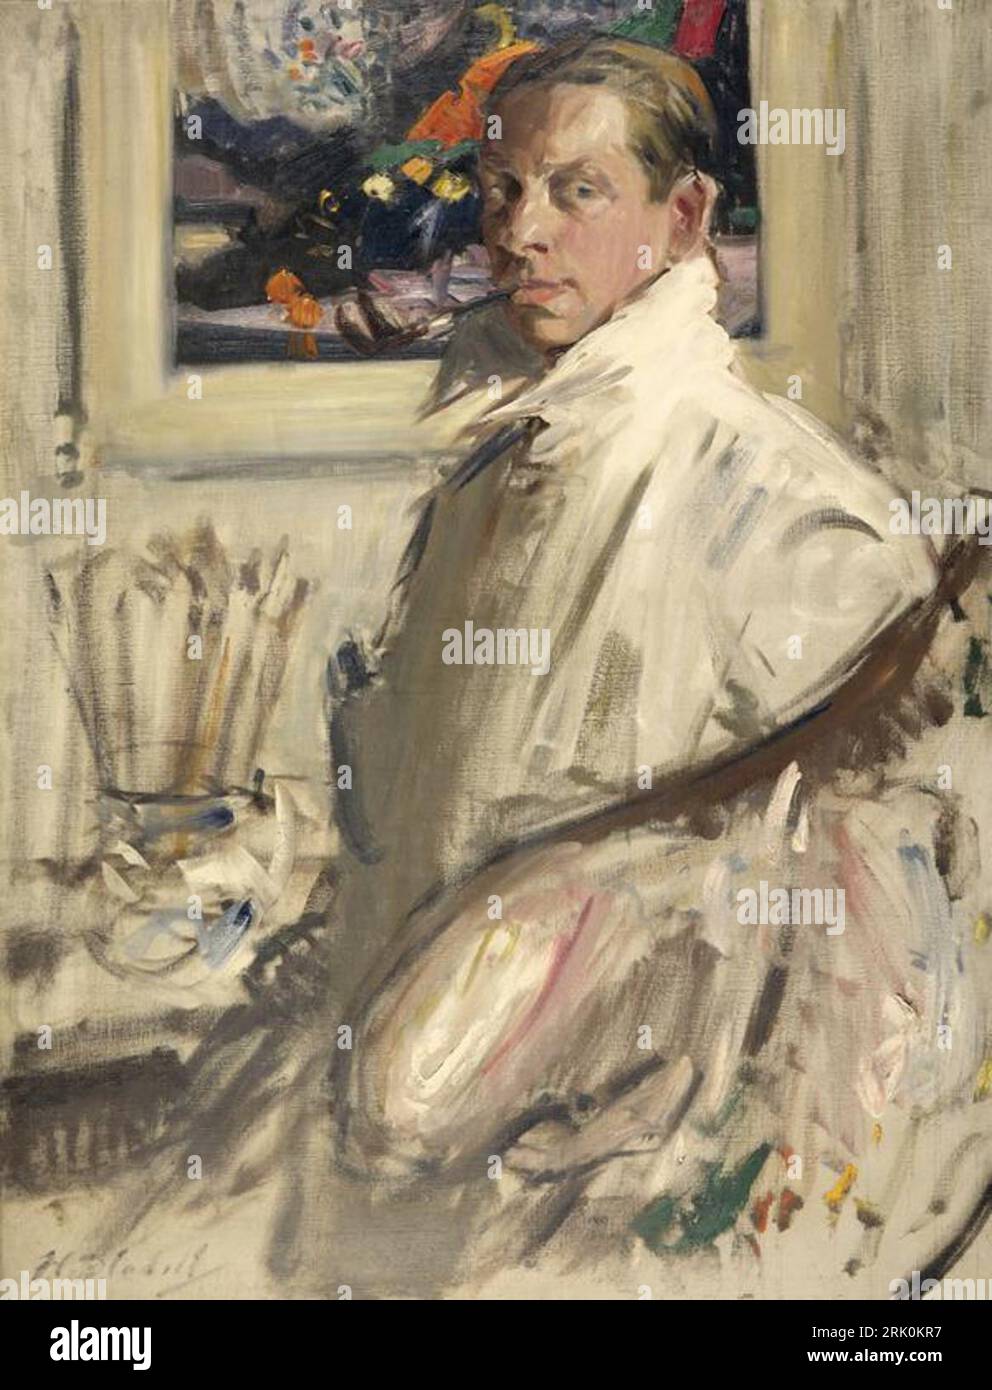 Francis Campbell Boileau Cadell, 1883 - 1937. Artist (Self-portrait) circa 1914 by Francis Cadell Stock Photo